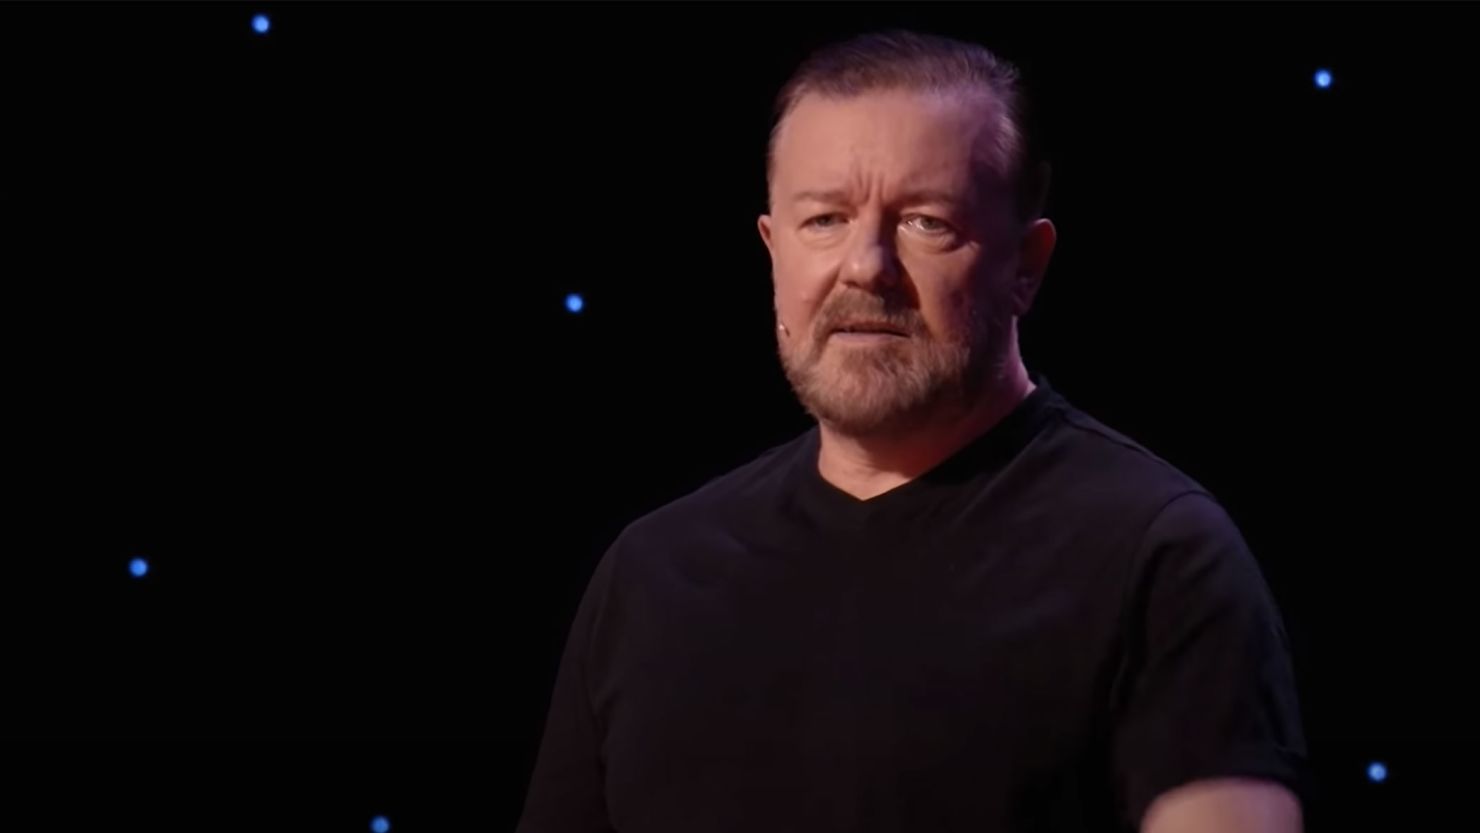 Ricky Gervais' "SuperNature" standup special premiered on Netflix Tuesday.